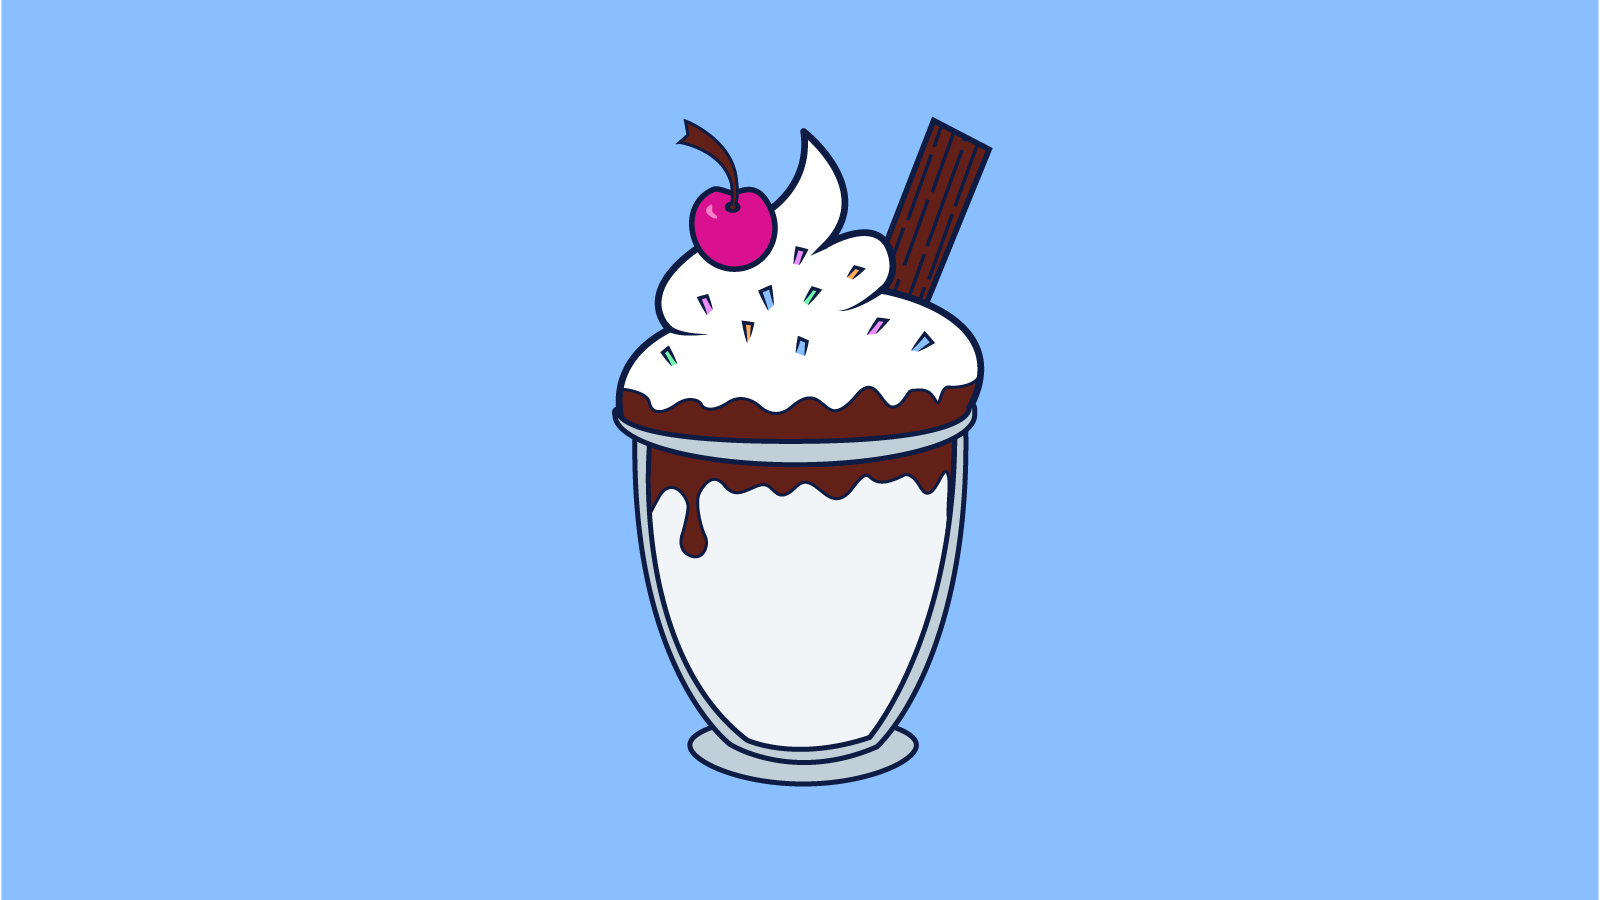 A vanilla ice cream sunday with chocolate sauce, sprinkles, and a cherry on top.